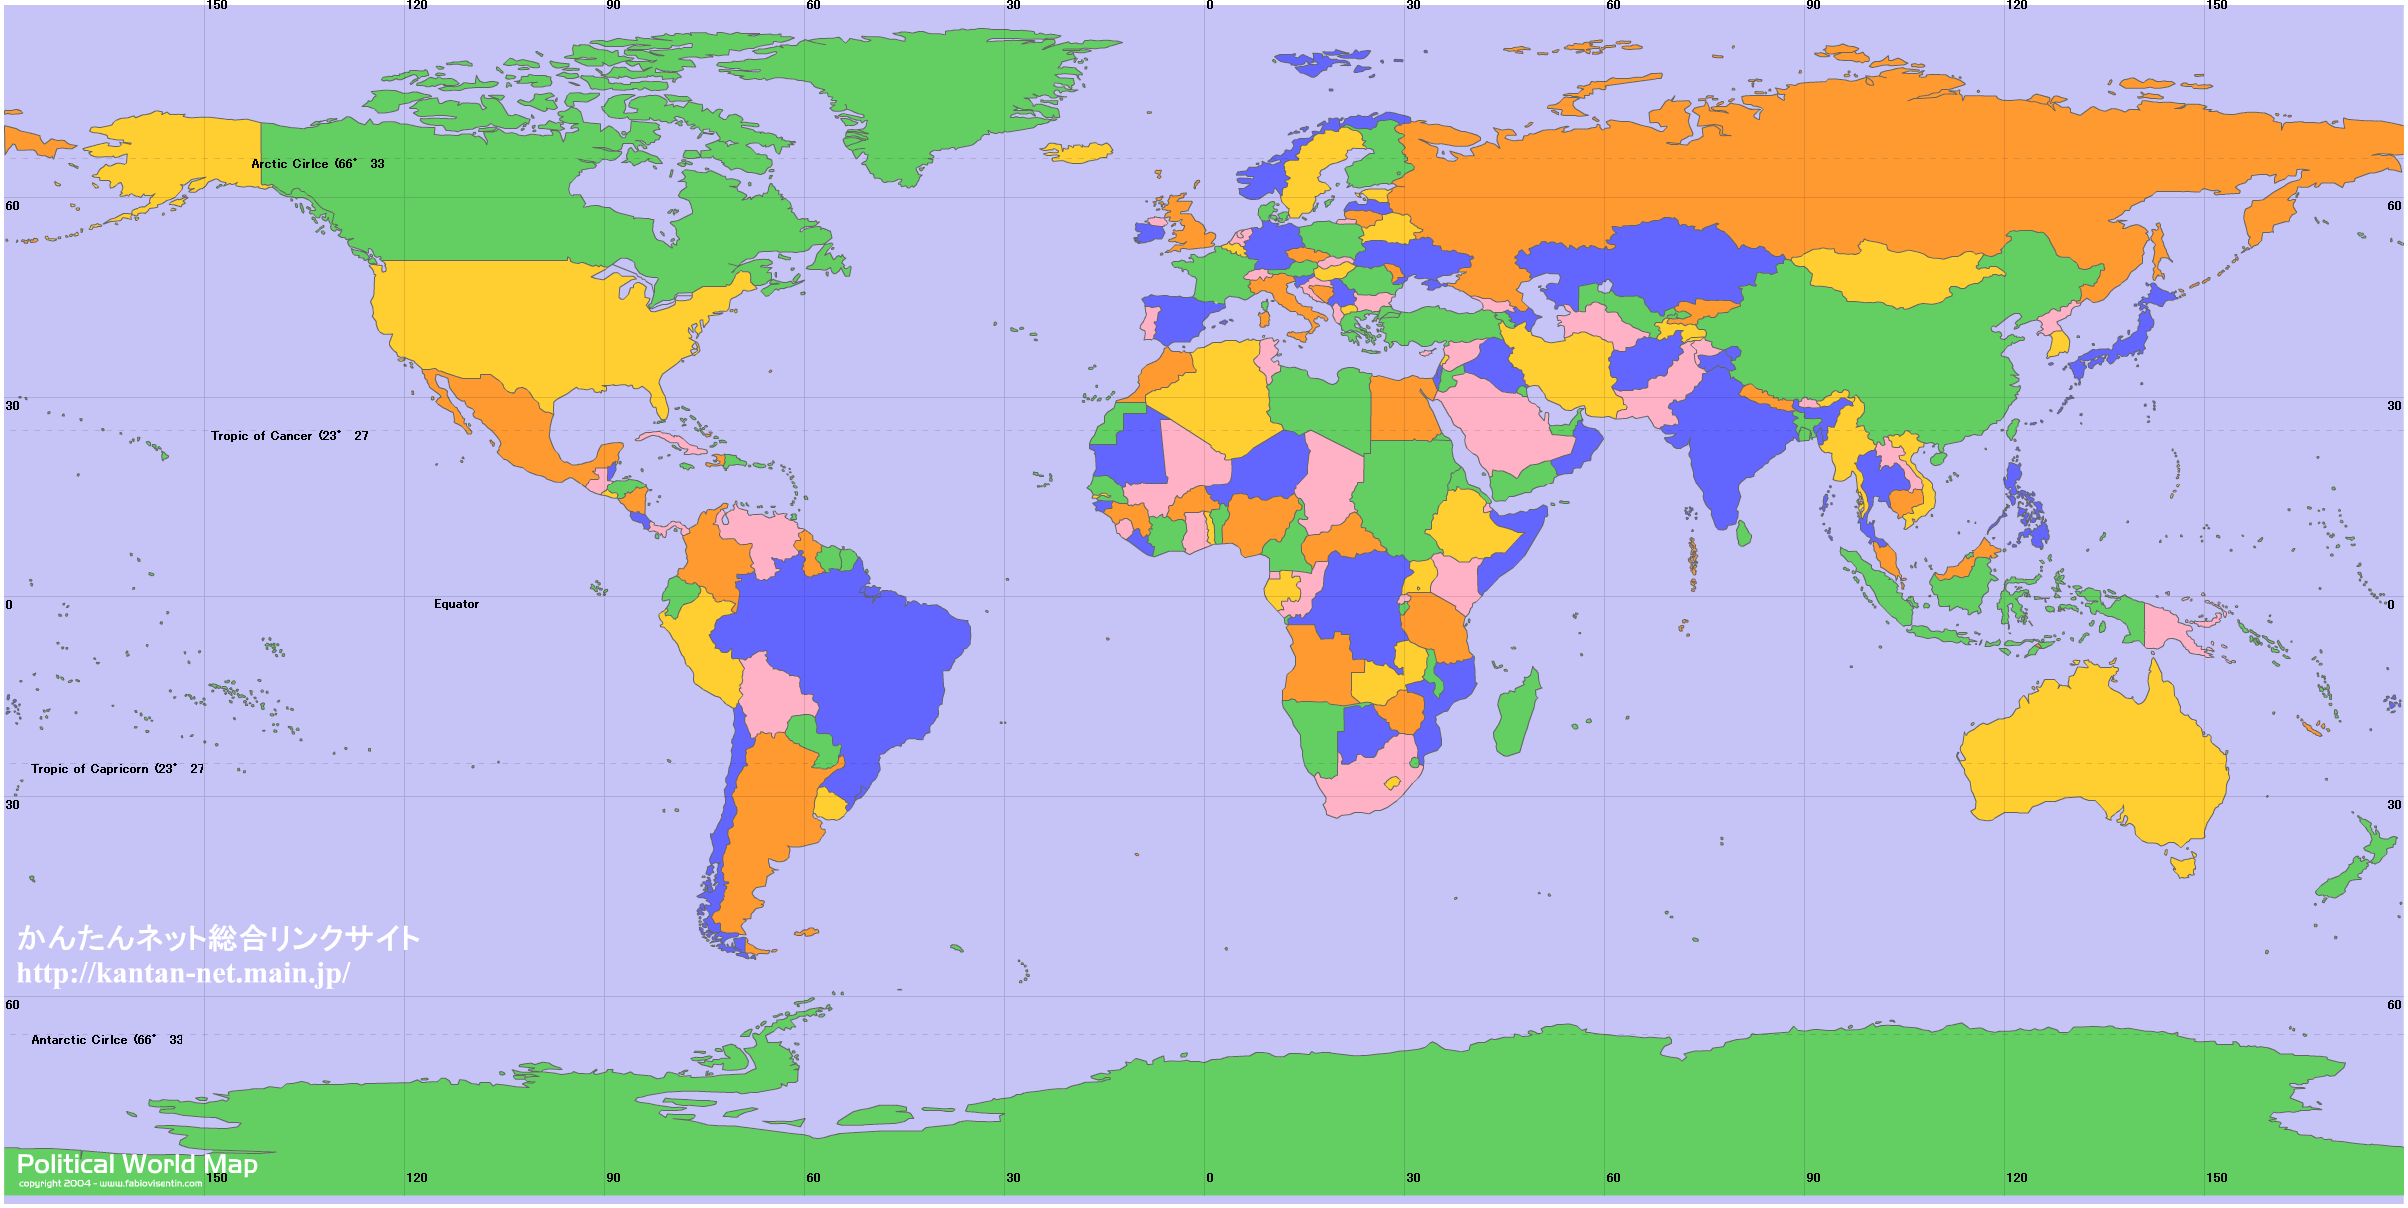 Free outline map of the world with latitude and longitude